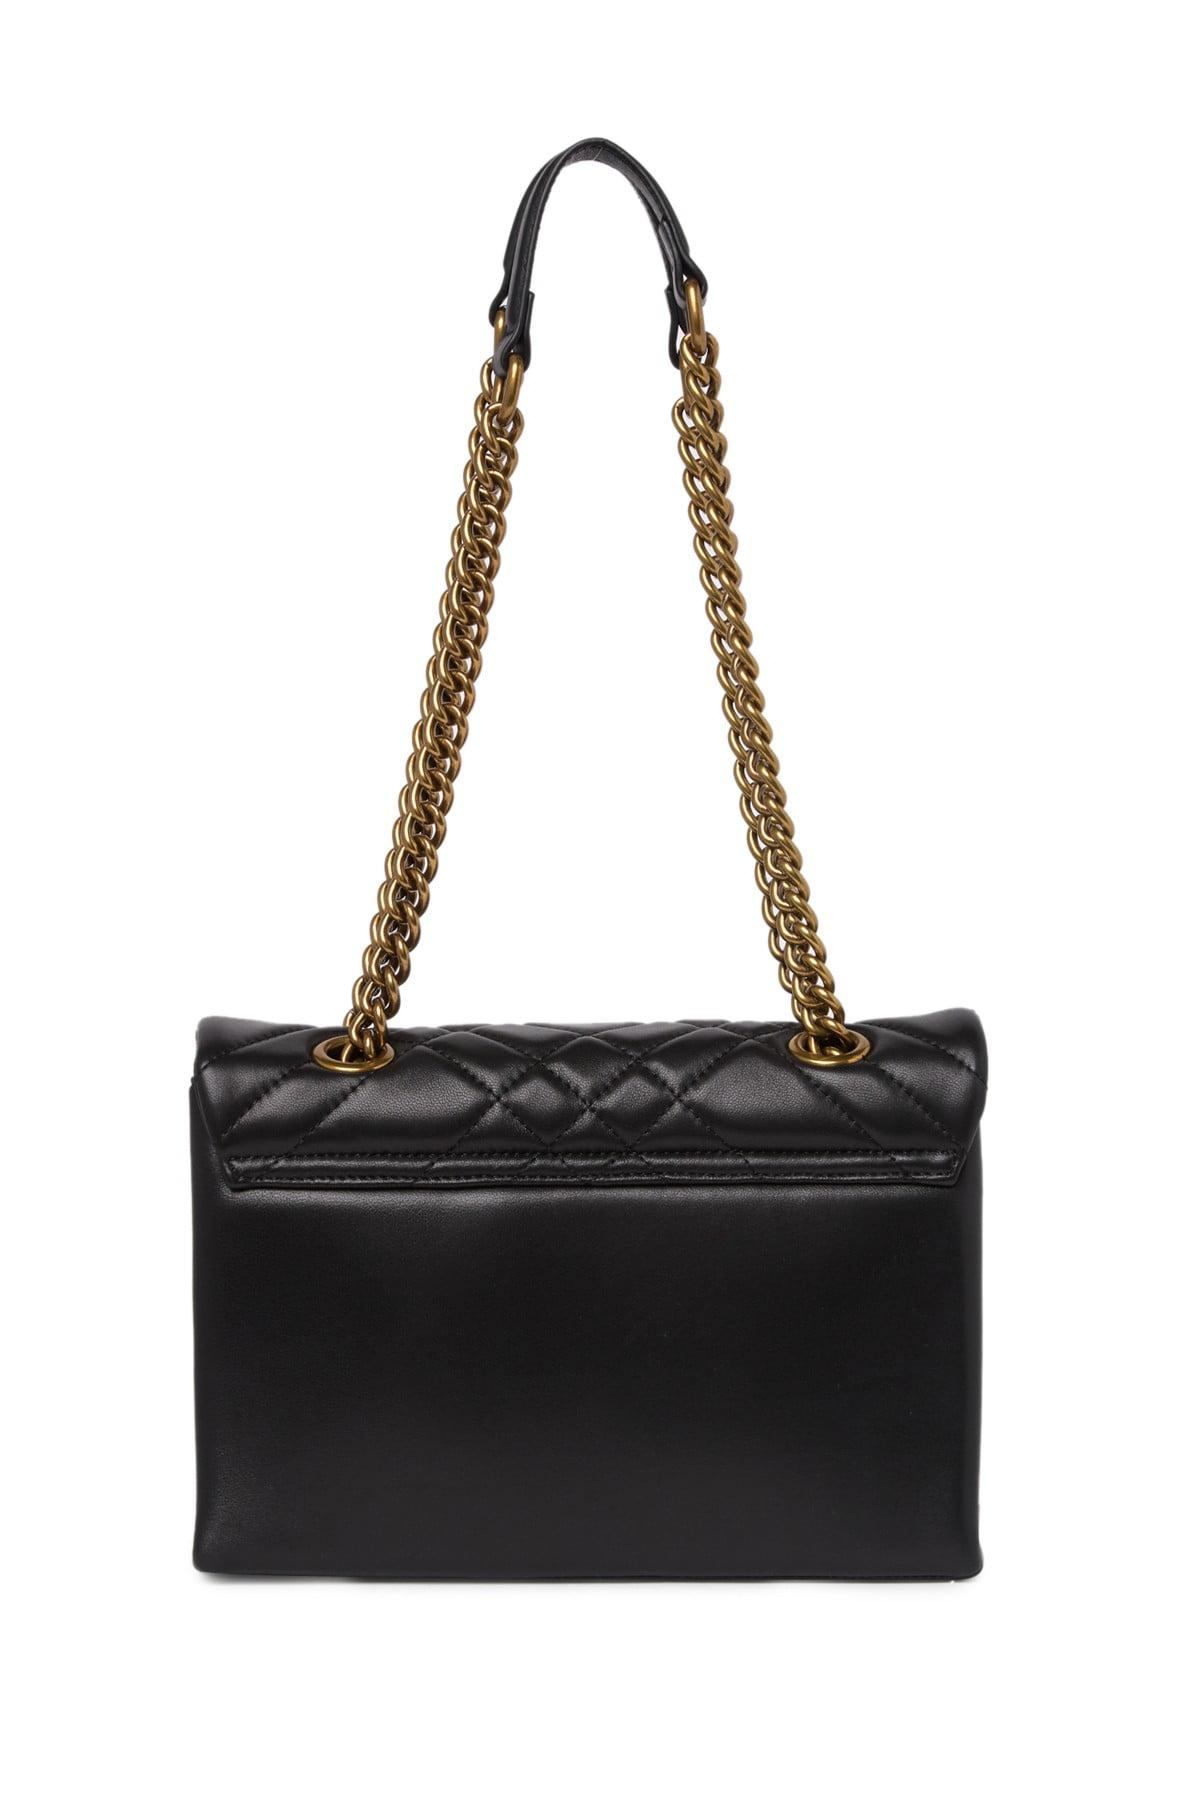 Kurt Geiger Leather Brixton Quilted Lock Bag in Black - Lyst